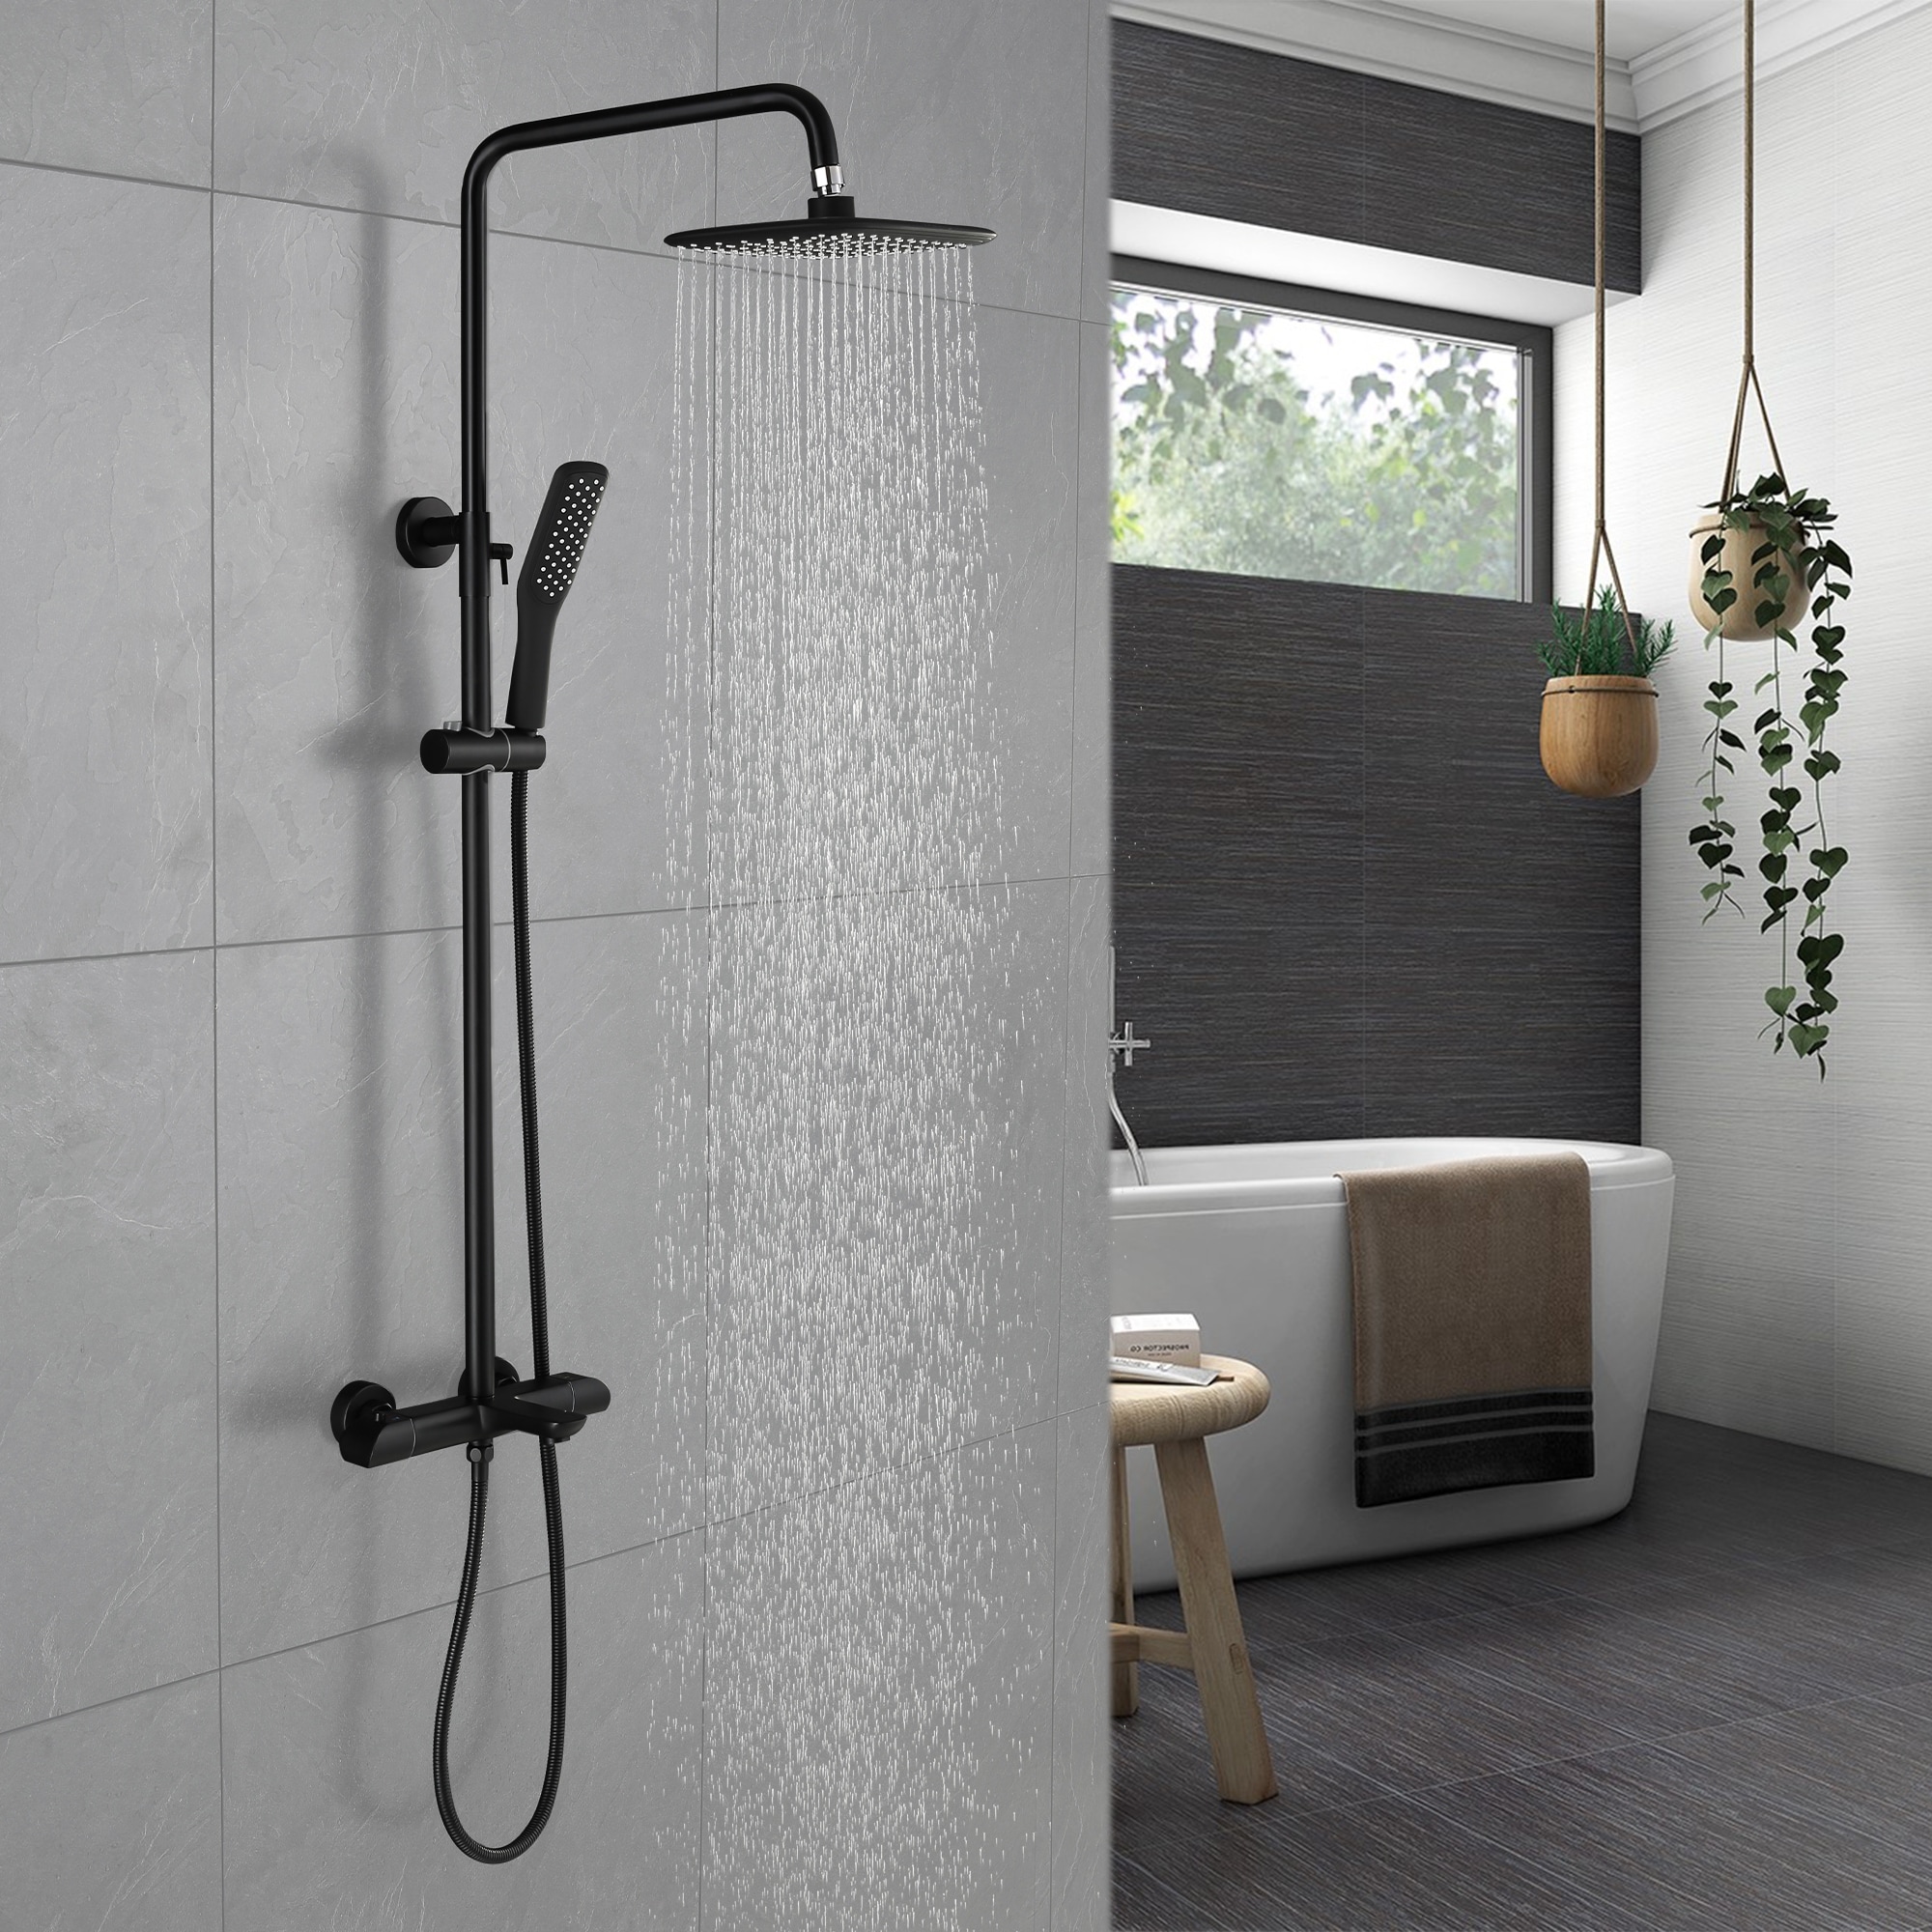 https://ak1.ostkcdn.com/images/products/is/images/direct/54fca803b204489cb714a7c309103ad0cfaeb1e6/3-Way-Thermostatic-Exposed-Install-Rain-Shower-Head-Black-with-high-pressure-Handle.jpg